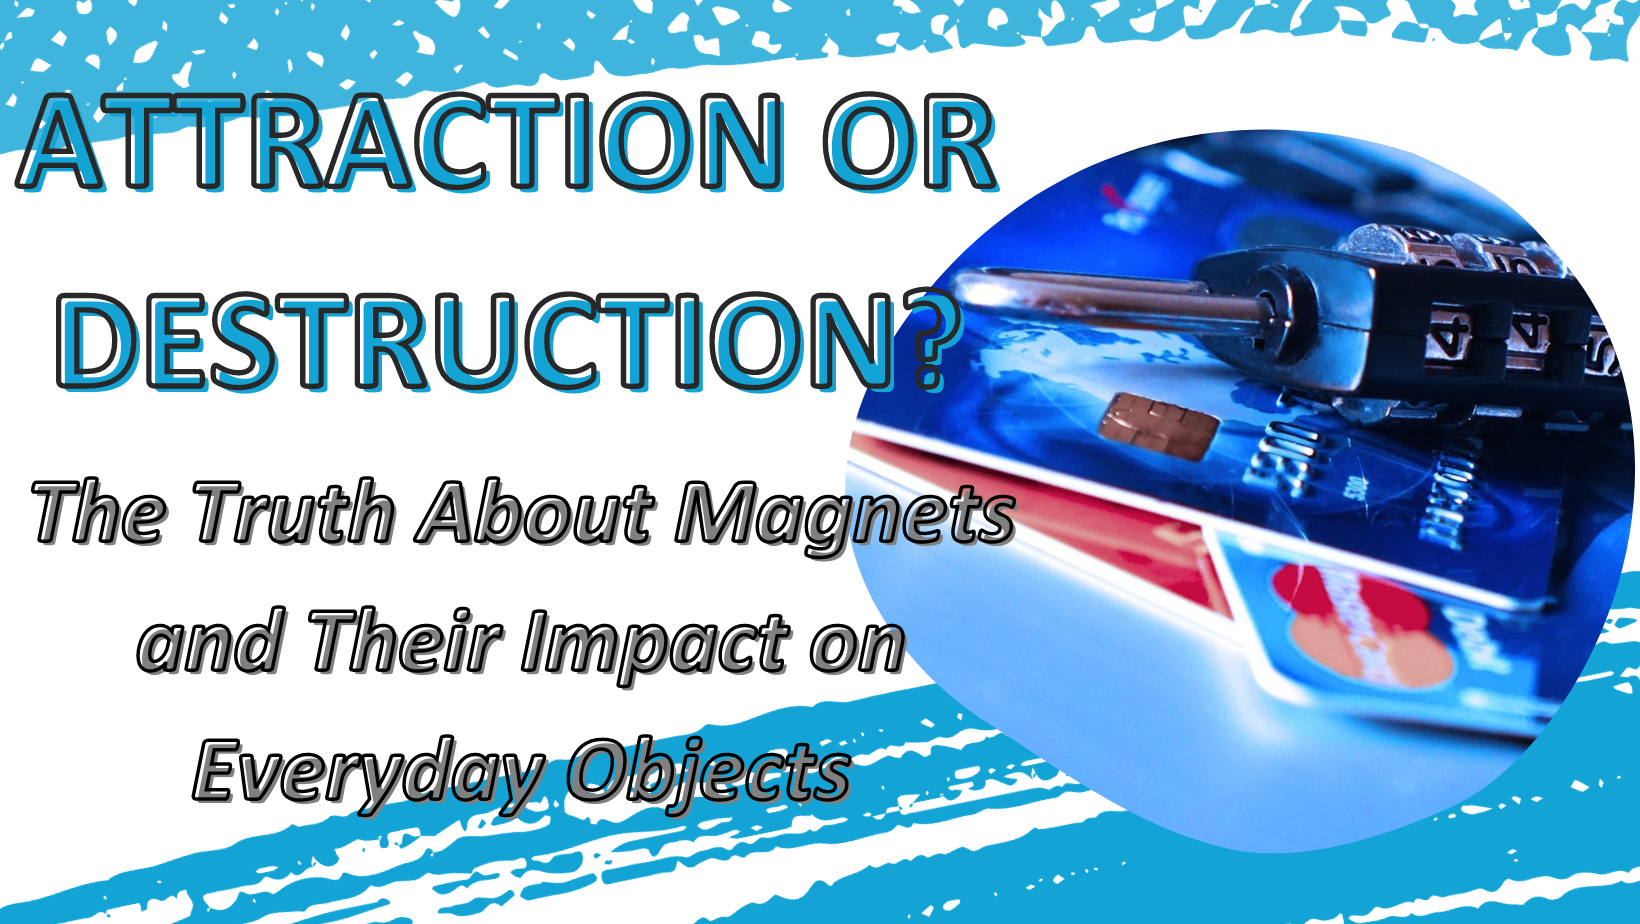 Attraction or Destruction? The Truth About Magnets and Their Impact on Everyday Objects